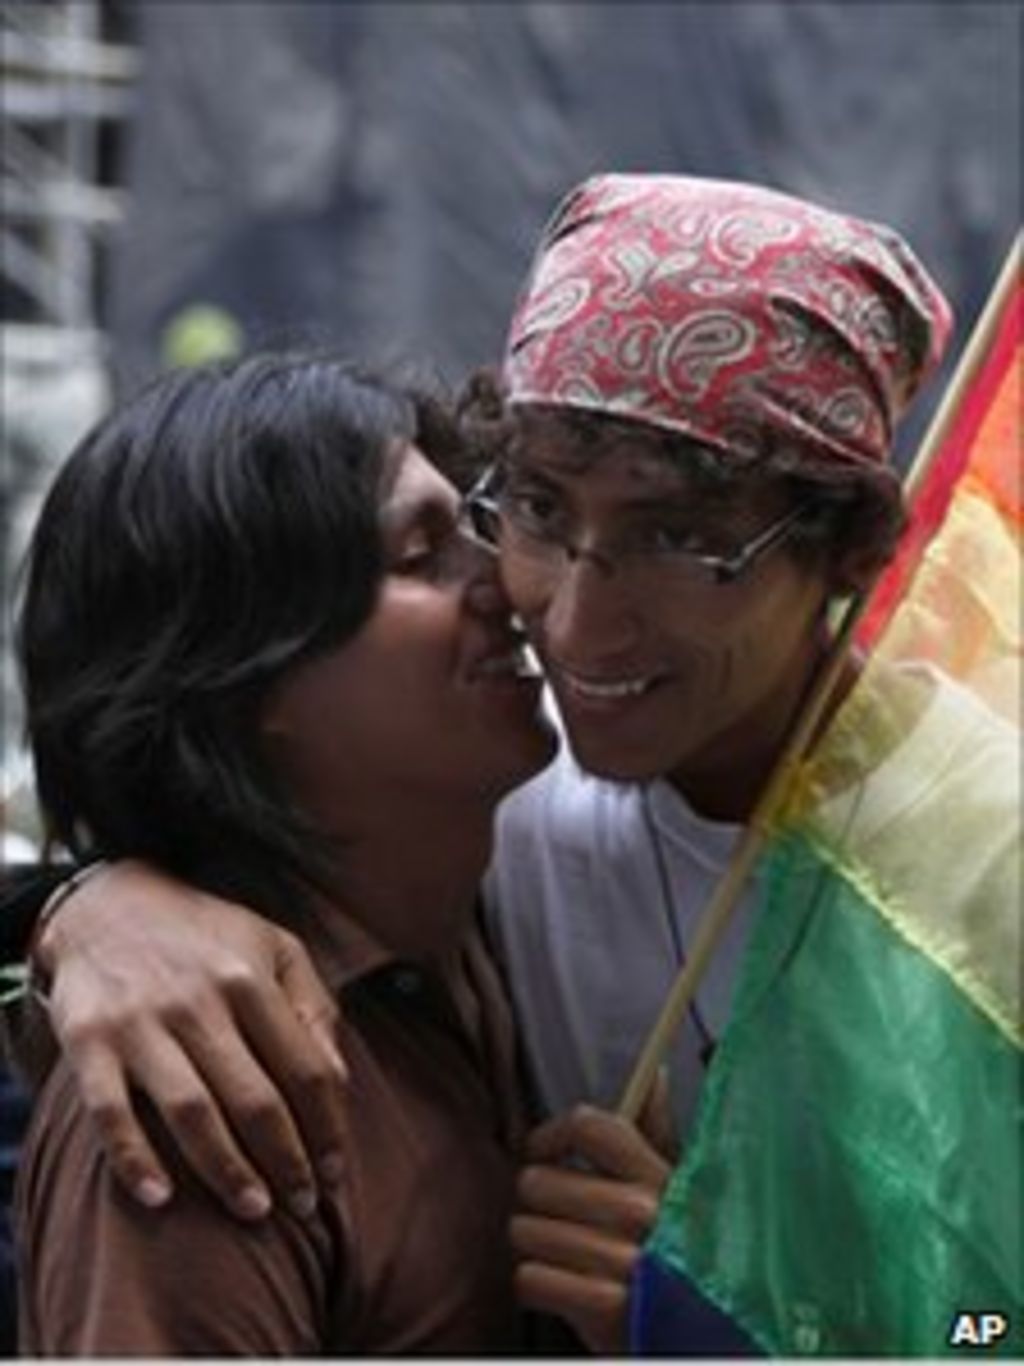 Chavez christian gay marriage picture